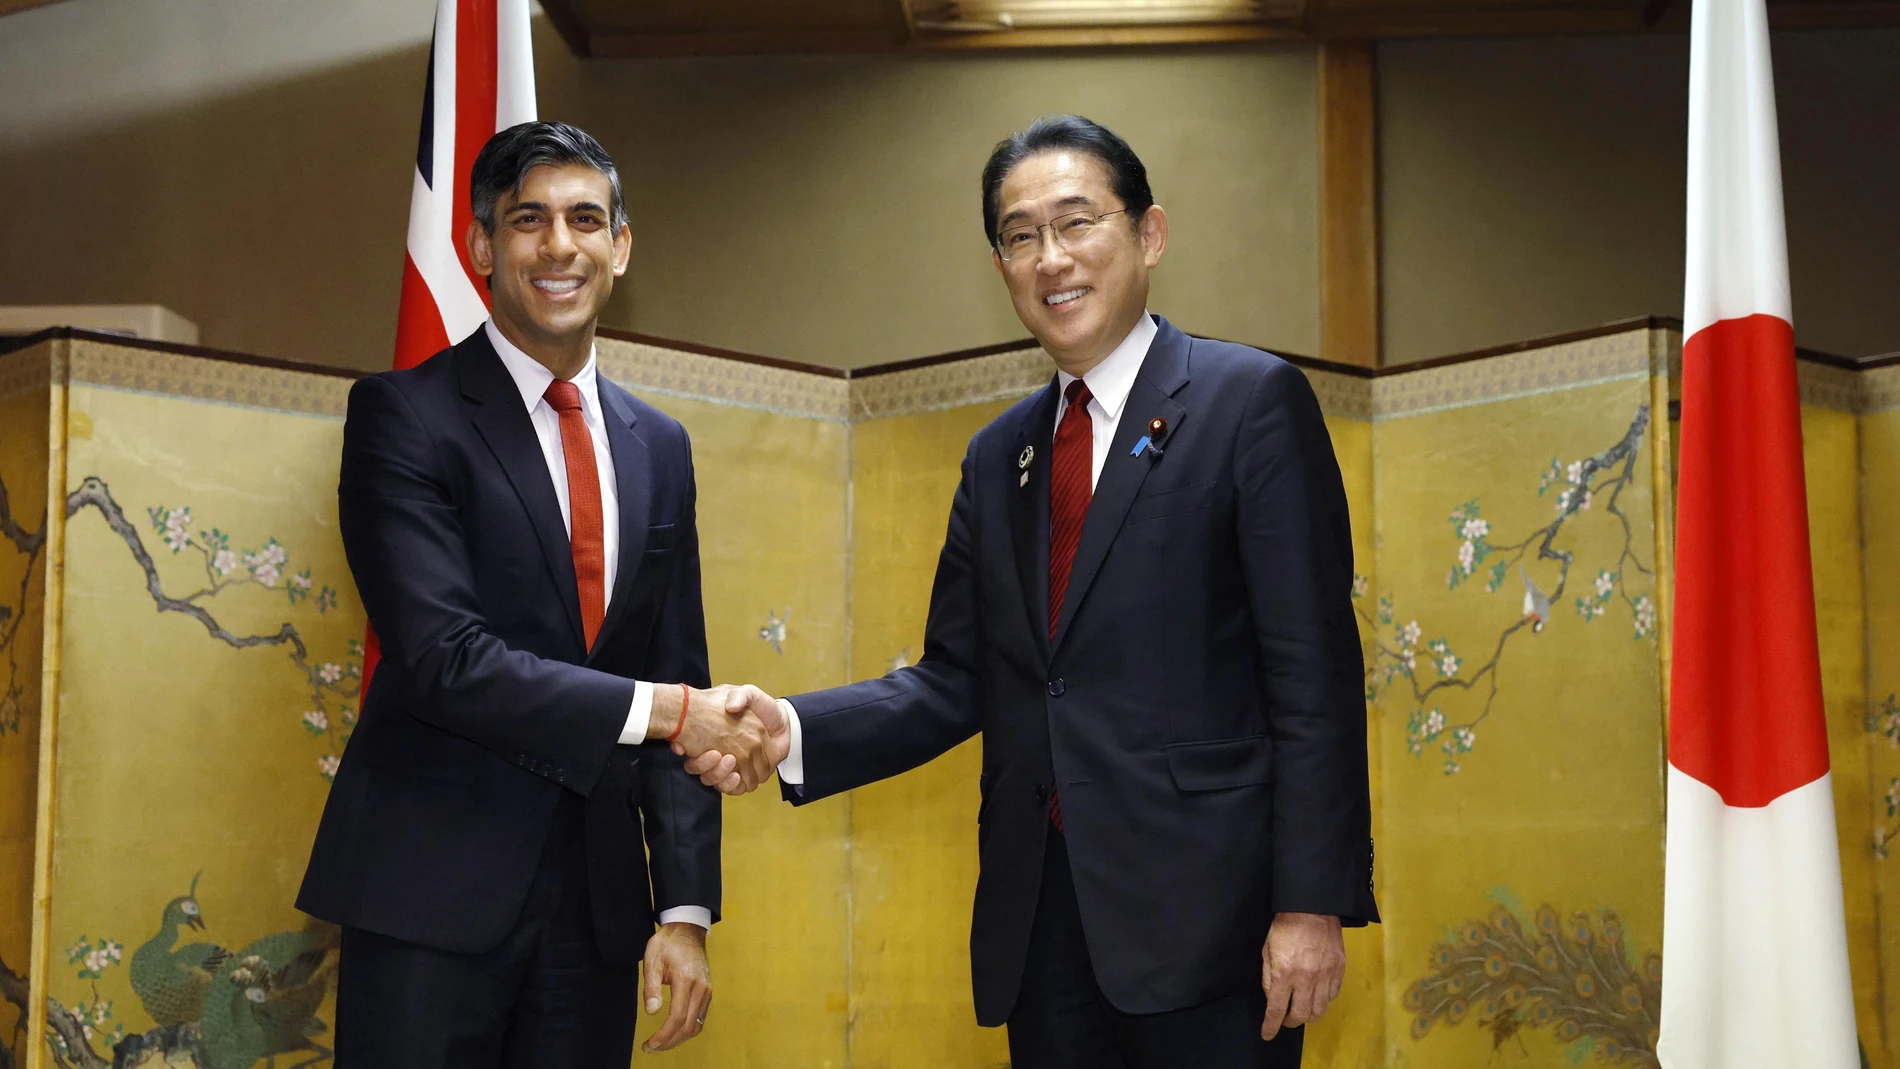 Hiroshima (Japan), 18/05/2023.- Japan's Prime Minister Fumio Kishida (R) shakes hands with British Prime Minister Rishi Sunak (L) during a bilateral meeting ahead of the G7 Hiroshima Summit in Hiroshima, Japan, 18 May 2023. The G7 Hiroshima Summit will be held from 19 to 21 May 2023. (Japón) EFE/EPA/POOL JAPAN OUT EDITORIAL USE ONLY/NO SALES